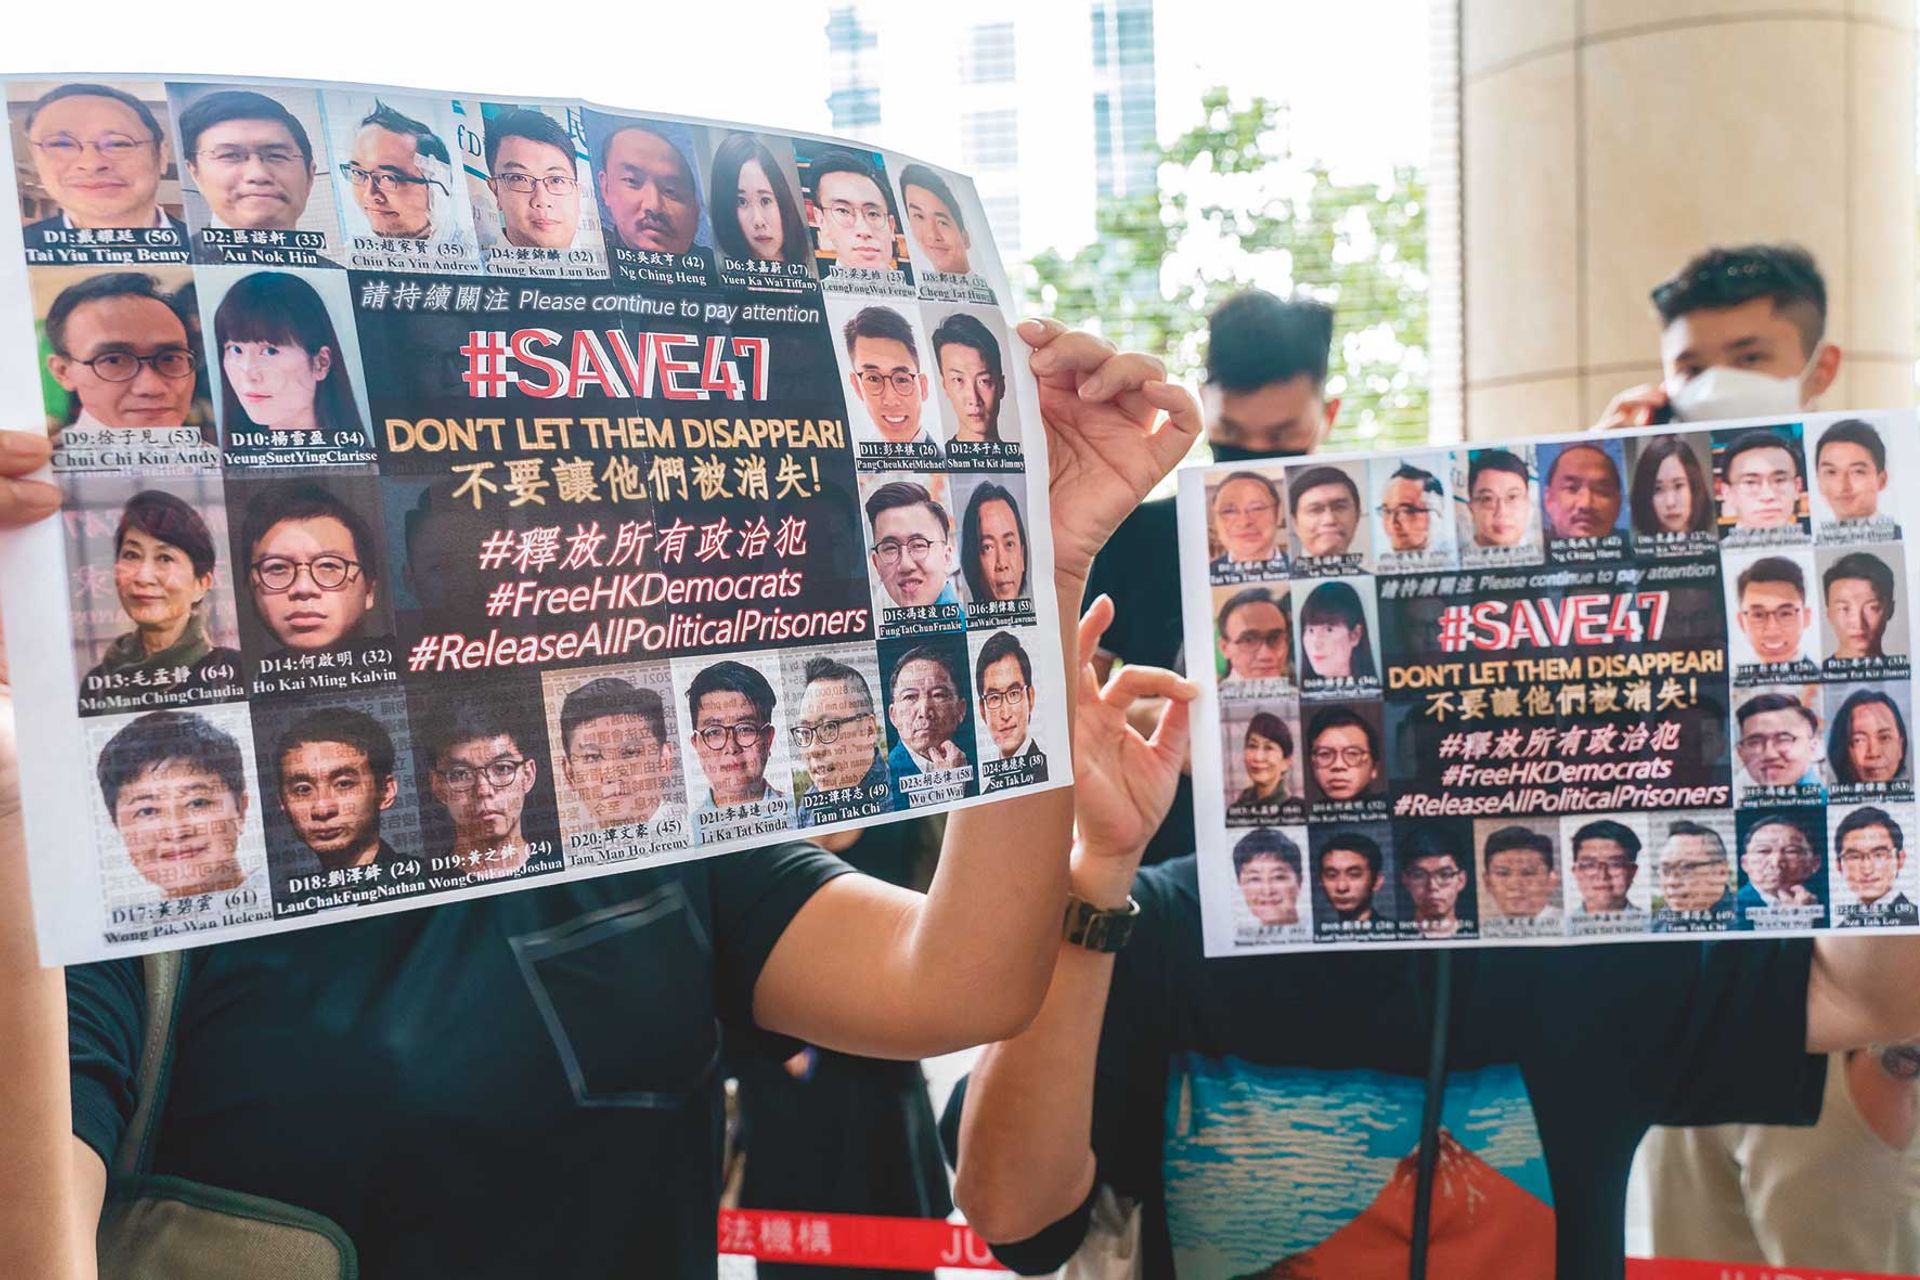 Art dealers don’t appear to have been put off visiting Hong Kong, despite the Chinese authorities having begun trials of the so-called “Hong Kong 47” group of pro-democracy activists

Photo: Anthony Kwan/Getty Images 



